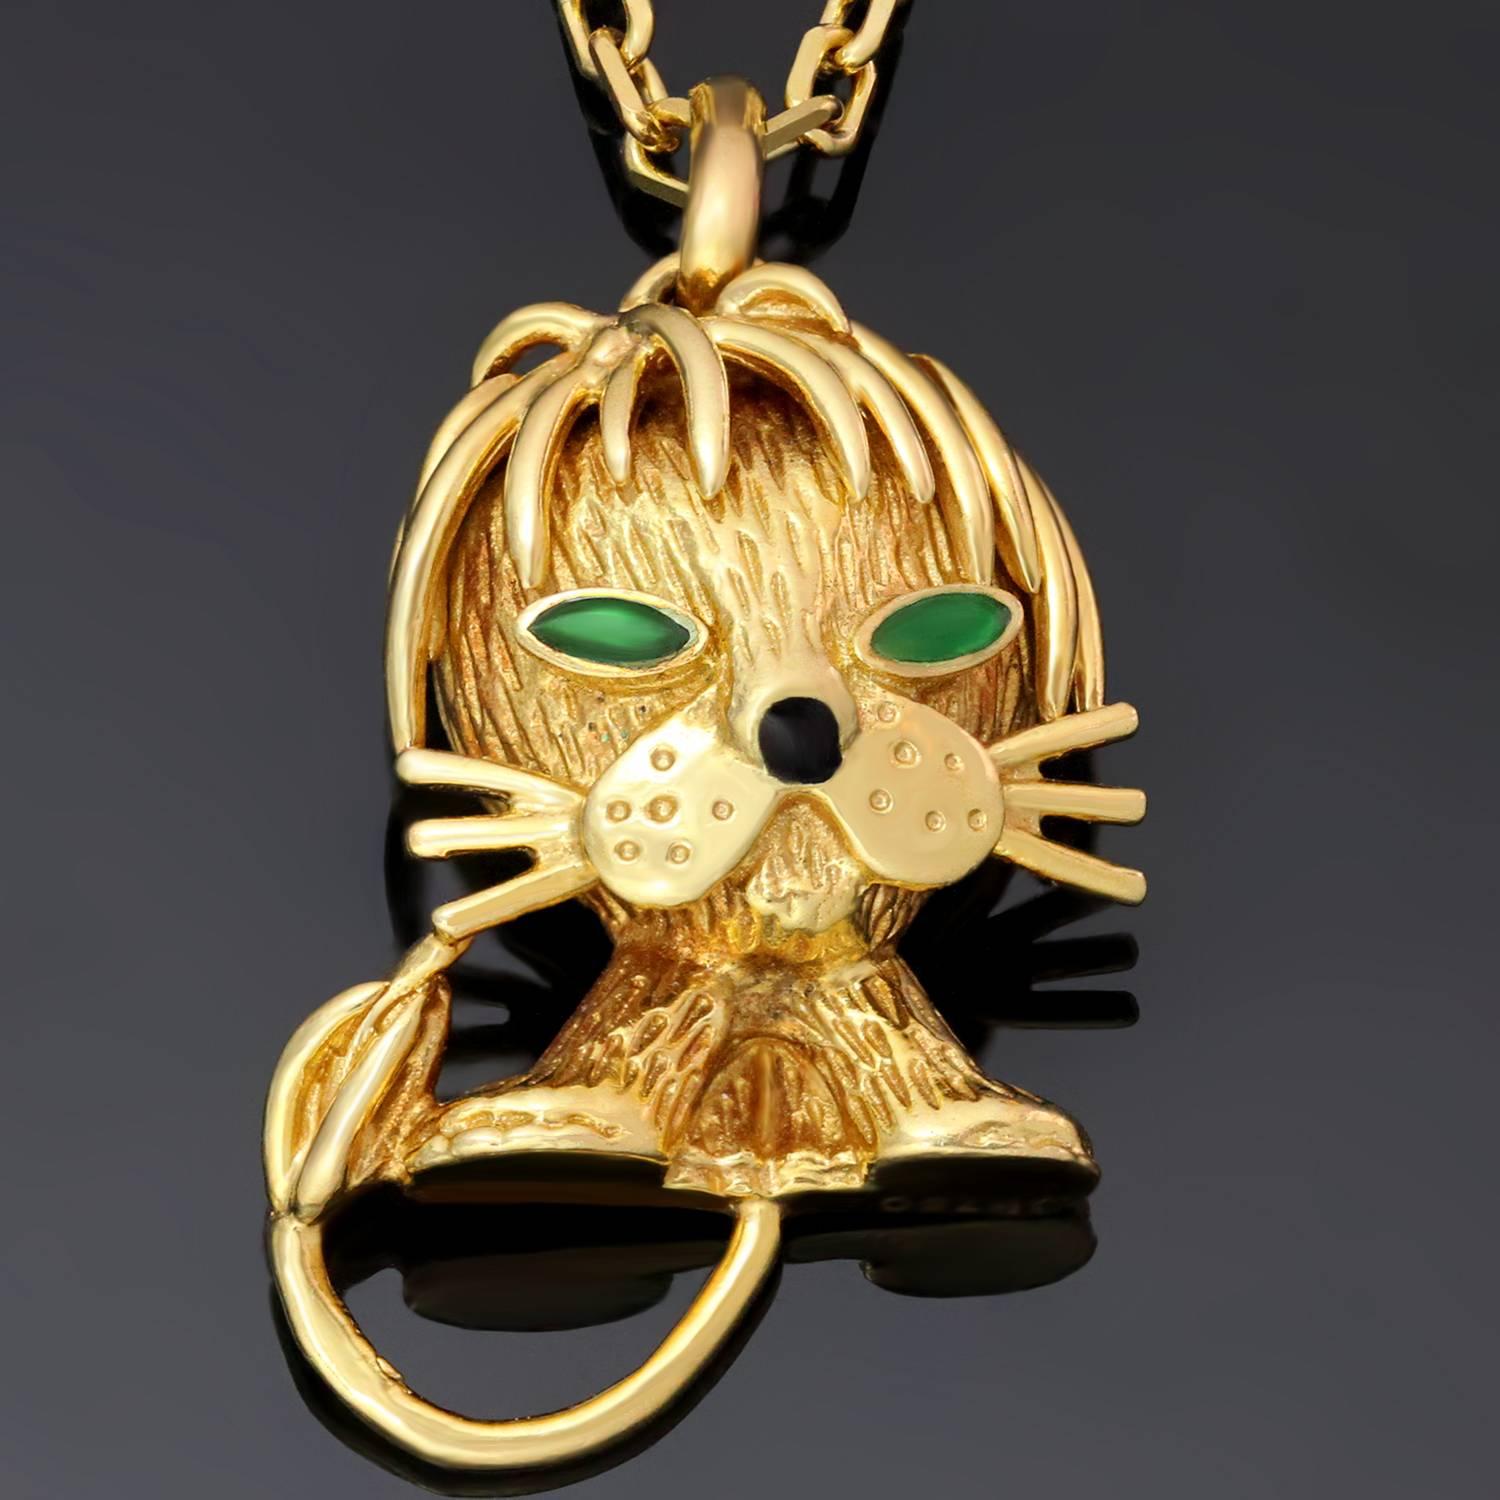 This iconic necklace from Van Cleef & Arpels features an adorable lion pendant crafted in 18k yellow gold and accented with green emerald eyes and a black jet nose. Made in France circa 1970s. Measurements: 0.59